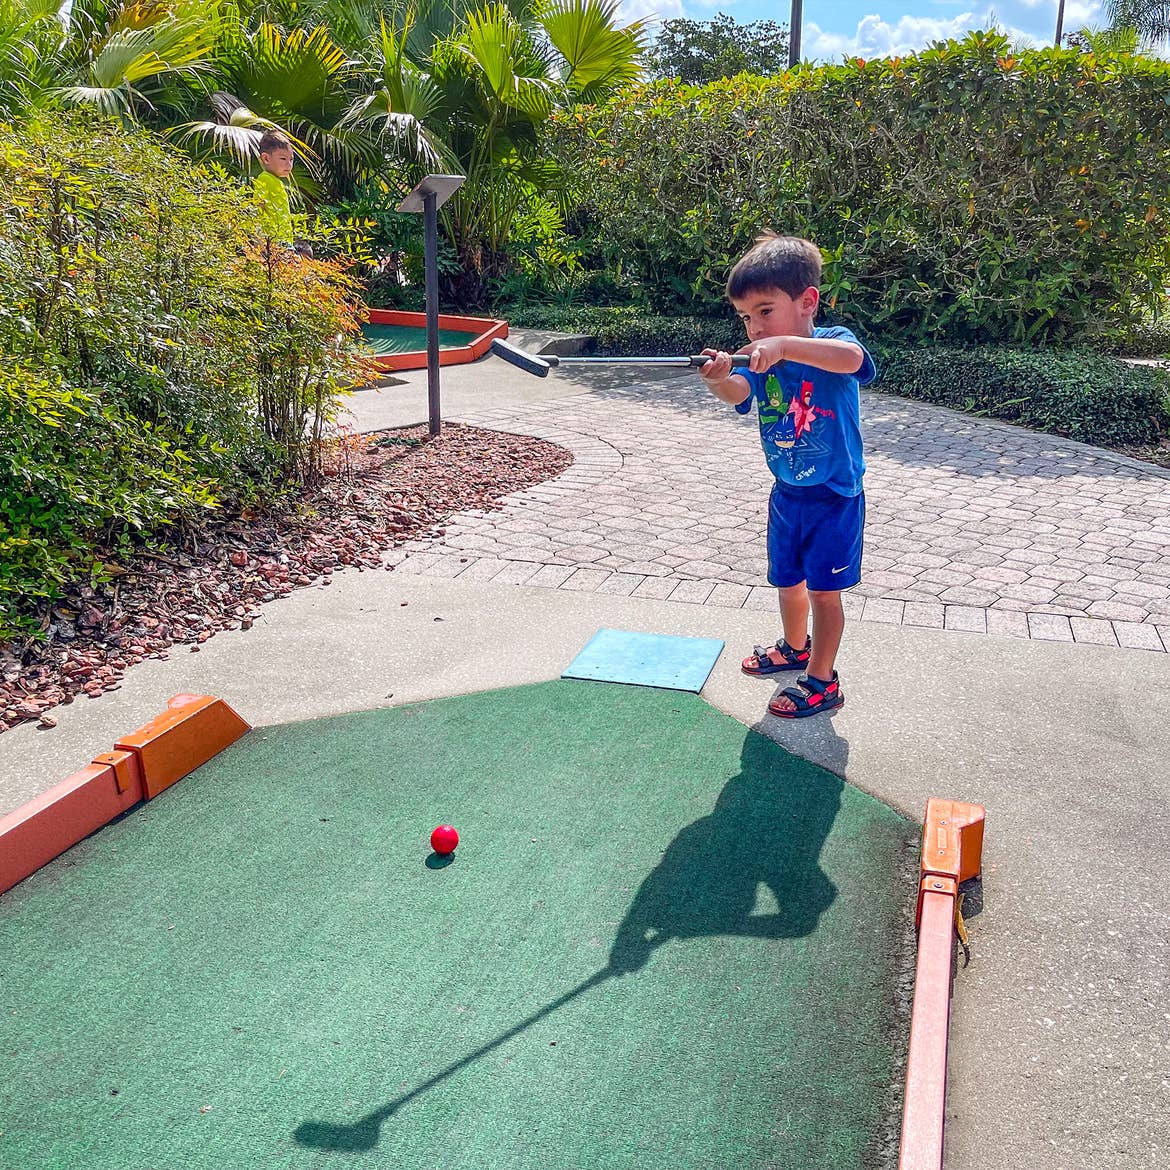 A young boy holds a putter on an outdoor mini golf course.